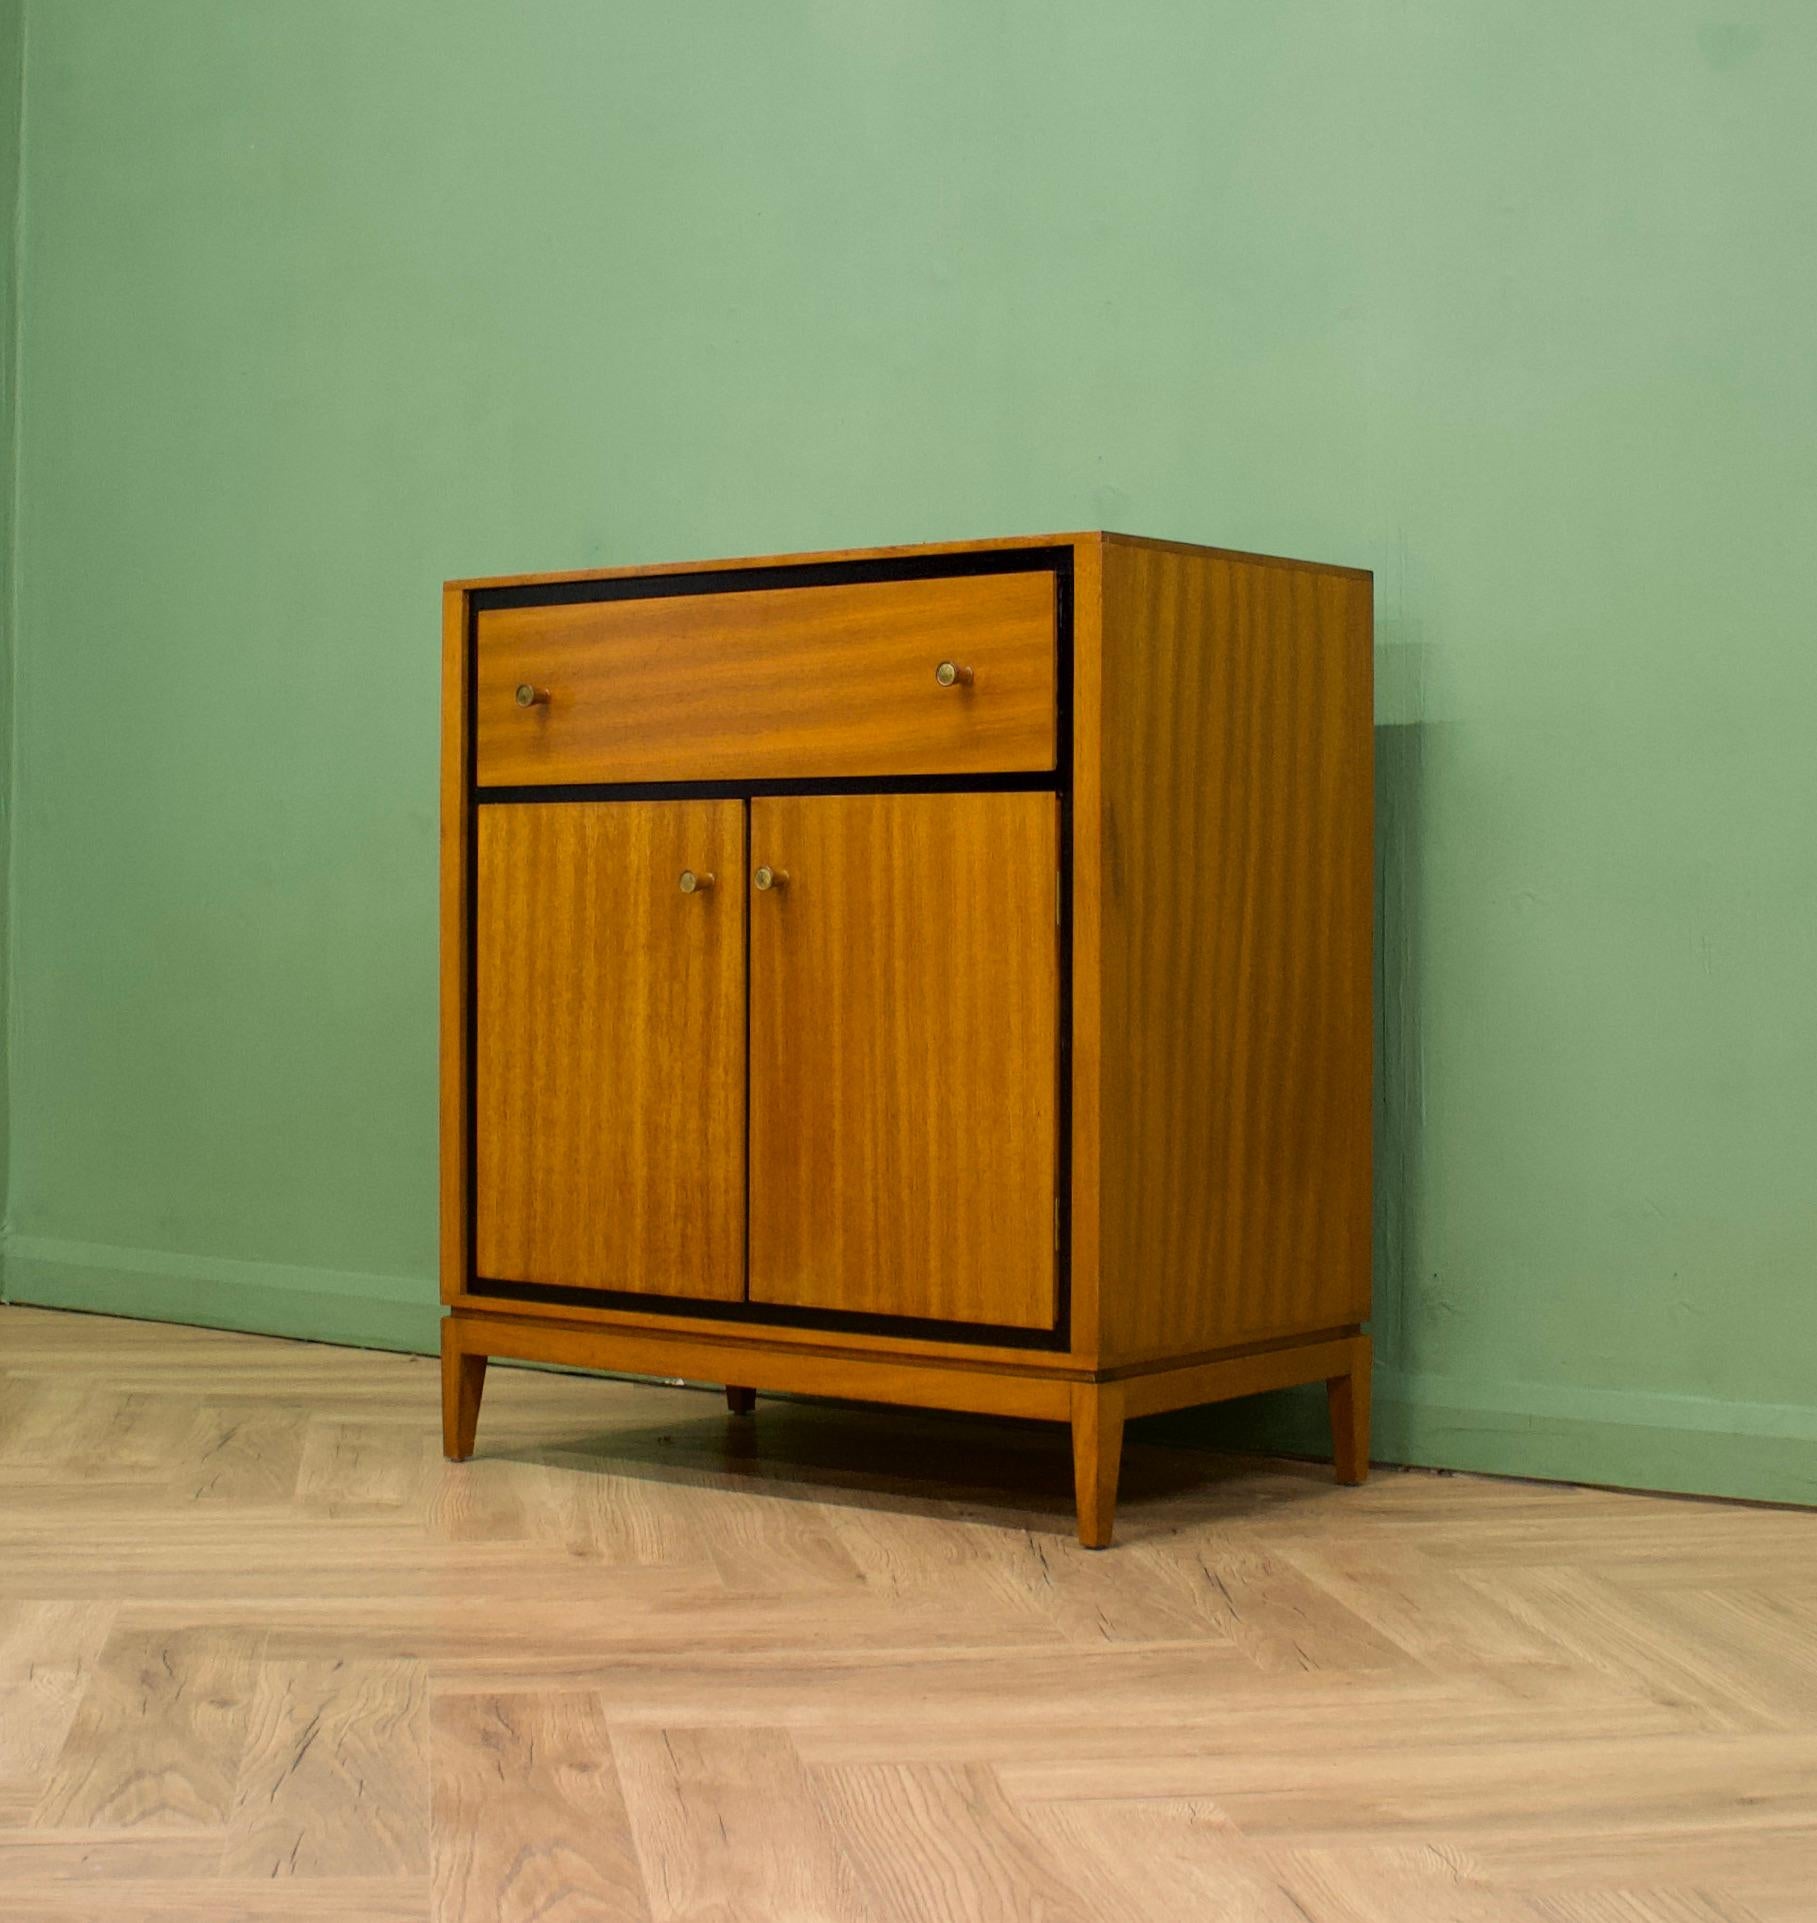 British Mid-Century Teak Cupboard or Sideboard by Heals from Loughborough, 1950s For Sale